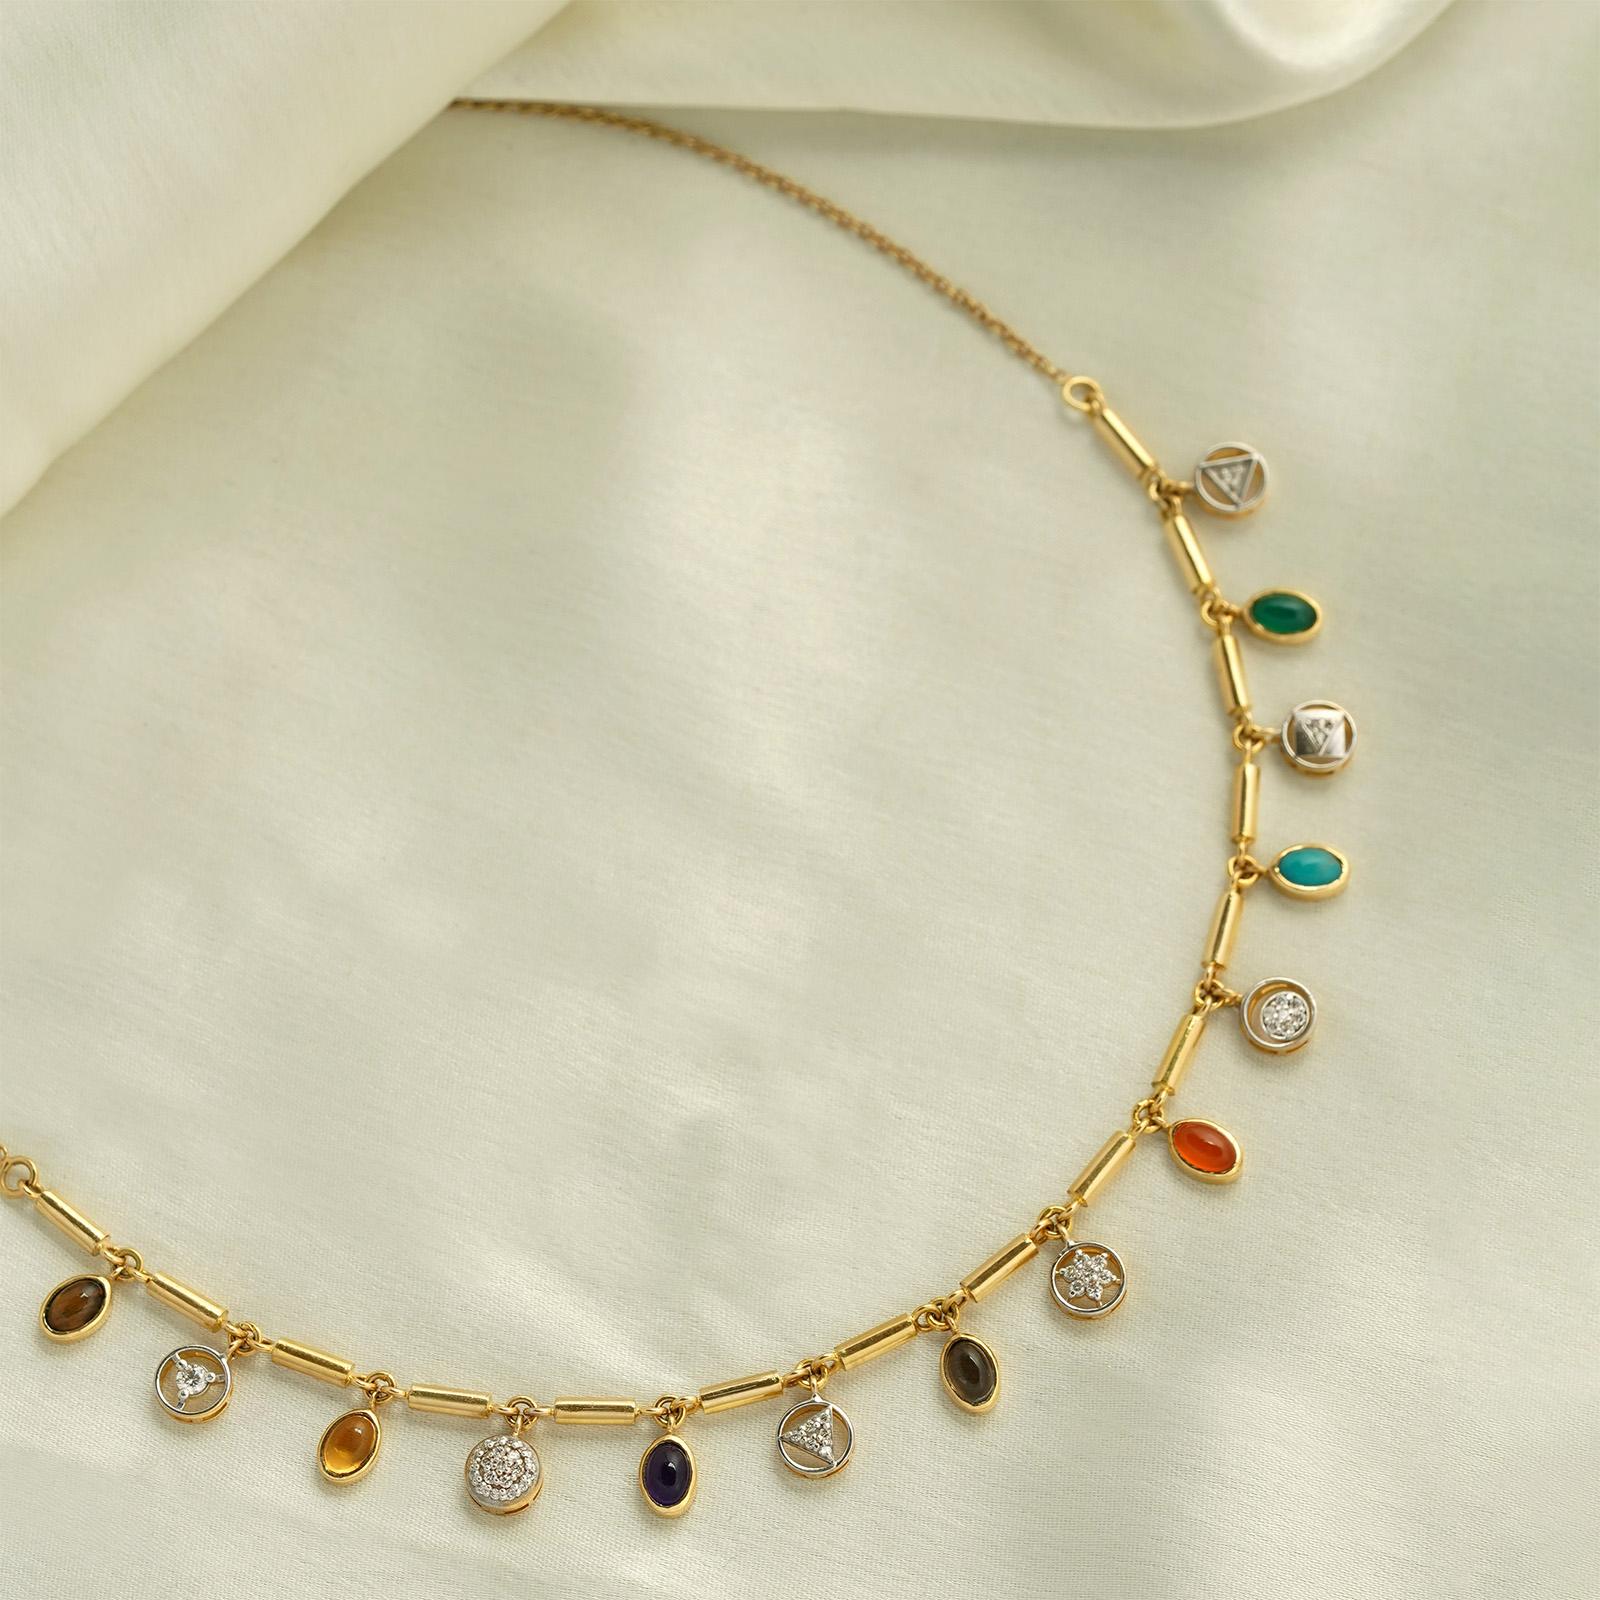 Gold(18K) : 1.98g
Gold(14K) : 10.15g
Diamonds : (VS clarity & H-I colour) : (Brilliant cut ) : 0.54ct
Gemstones : Smokey Quartz, Green Onyx, Turquoise, Amethyst, Citrine, Tigers Eye, Red Onyx

This elegant beauty is meticulously handcrafted with